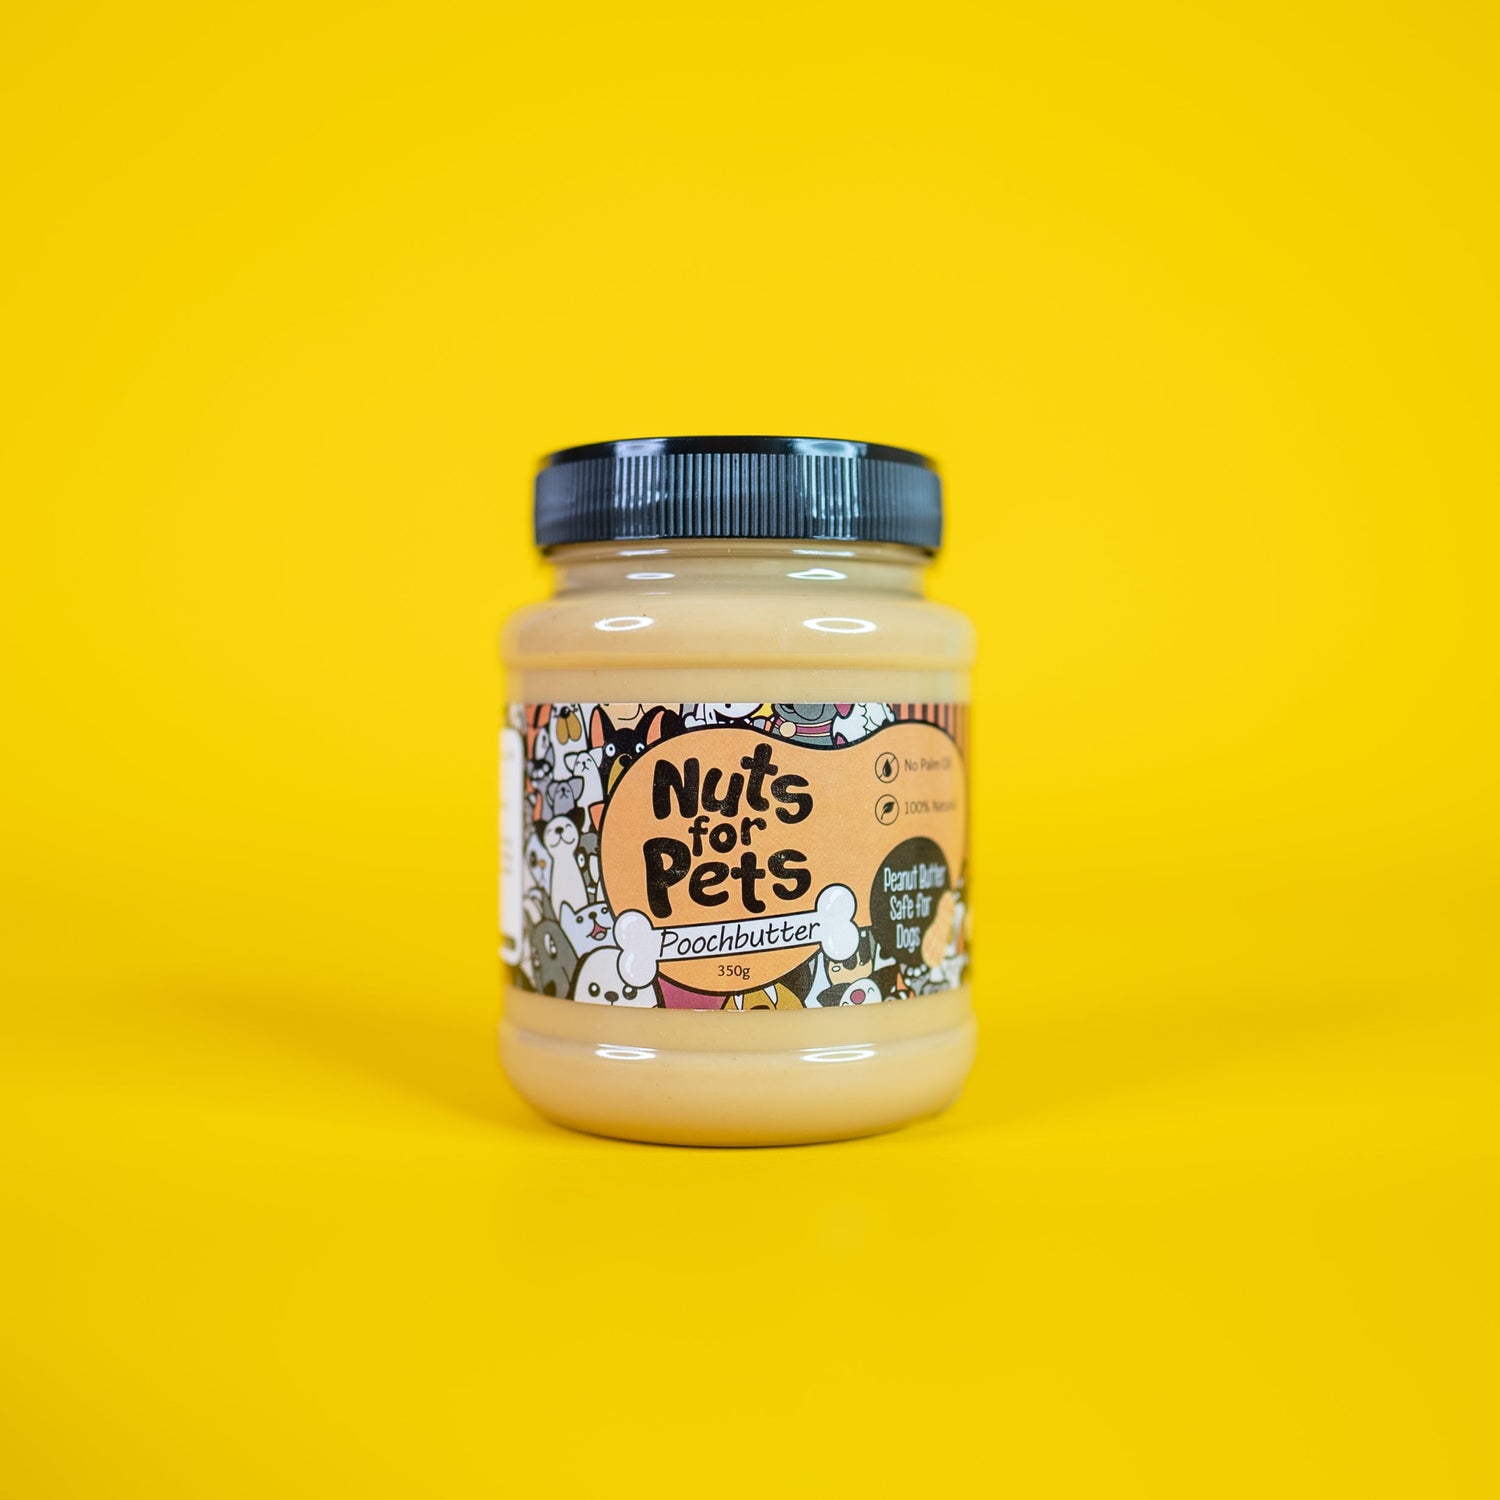 Paw-licking Carrot Cake & Nuts For Pets Butter Bundle - Doggy Baking Co by The Bottled Baking Co